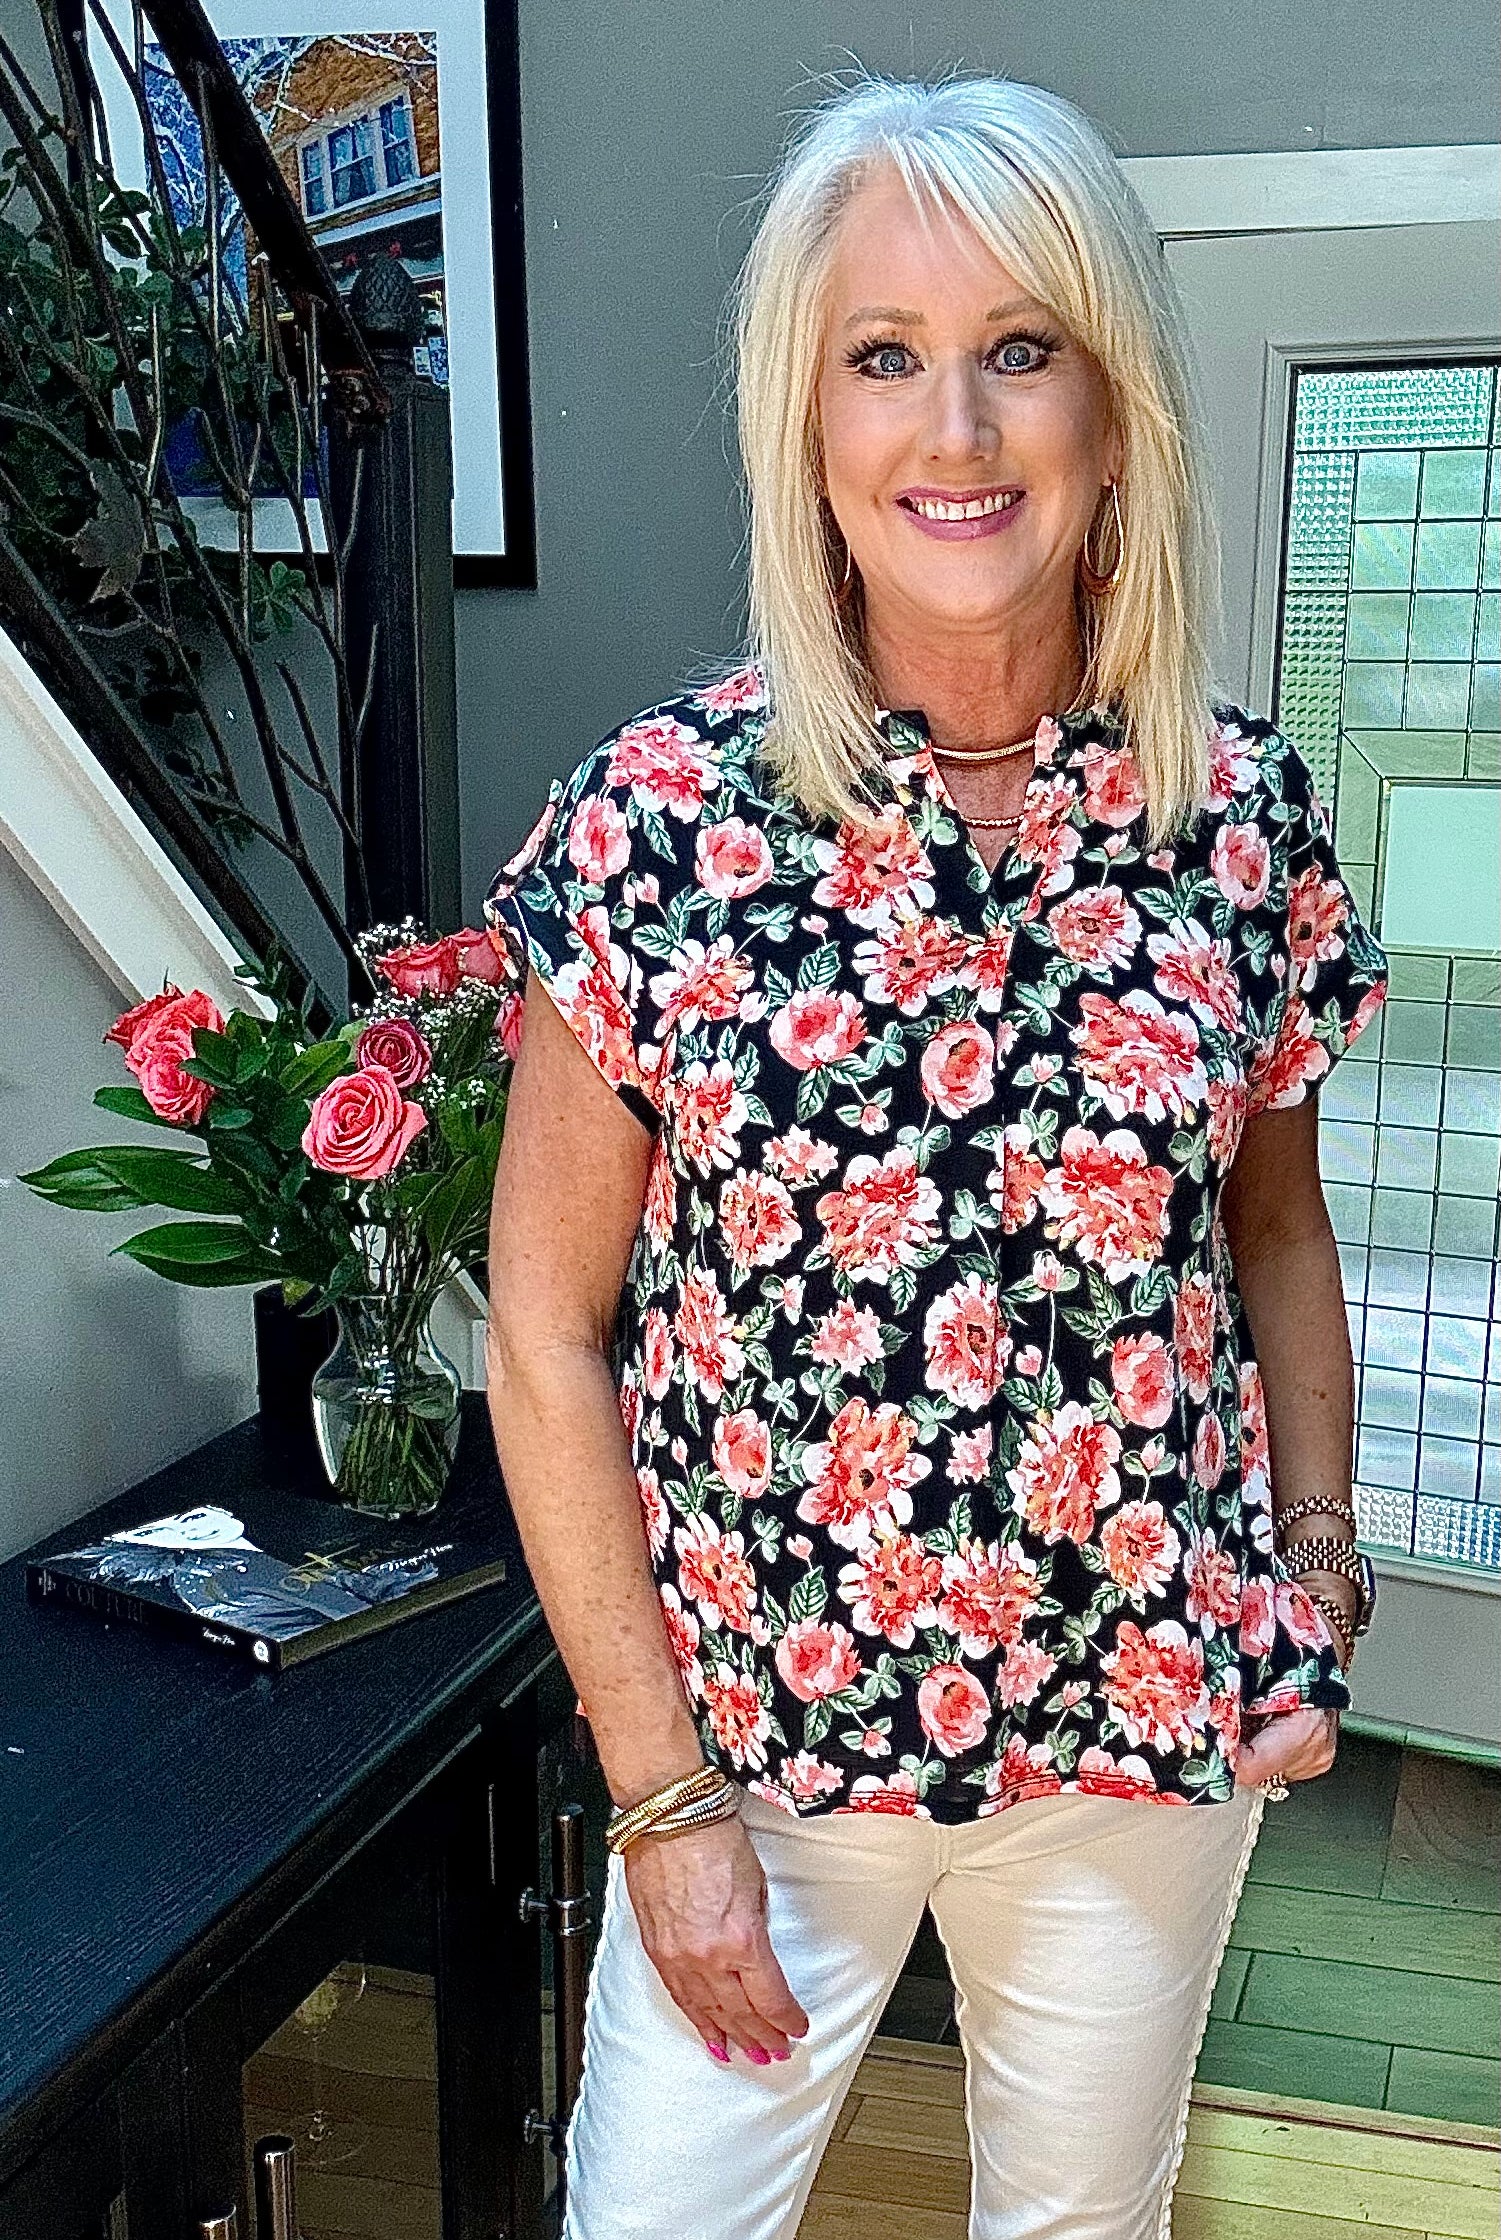 Lizzy Cap Sleeve Top in Black and Coral Floral-Short Sleeves-Ave Shops-Urban Threadz Boutique, Women's Fashion Boutique in Saugatuck, MI